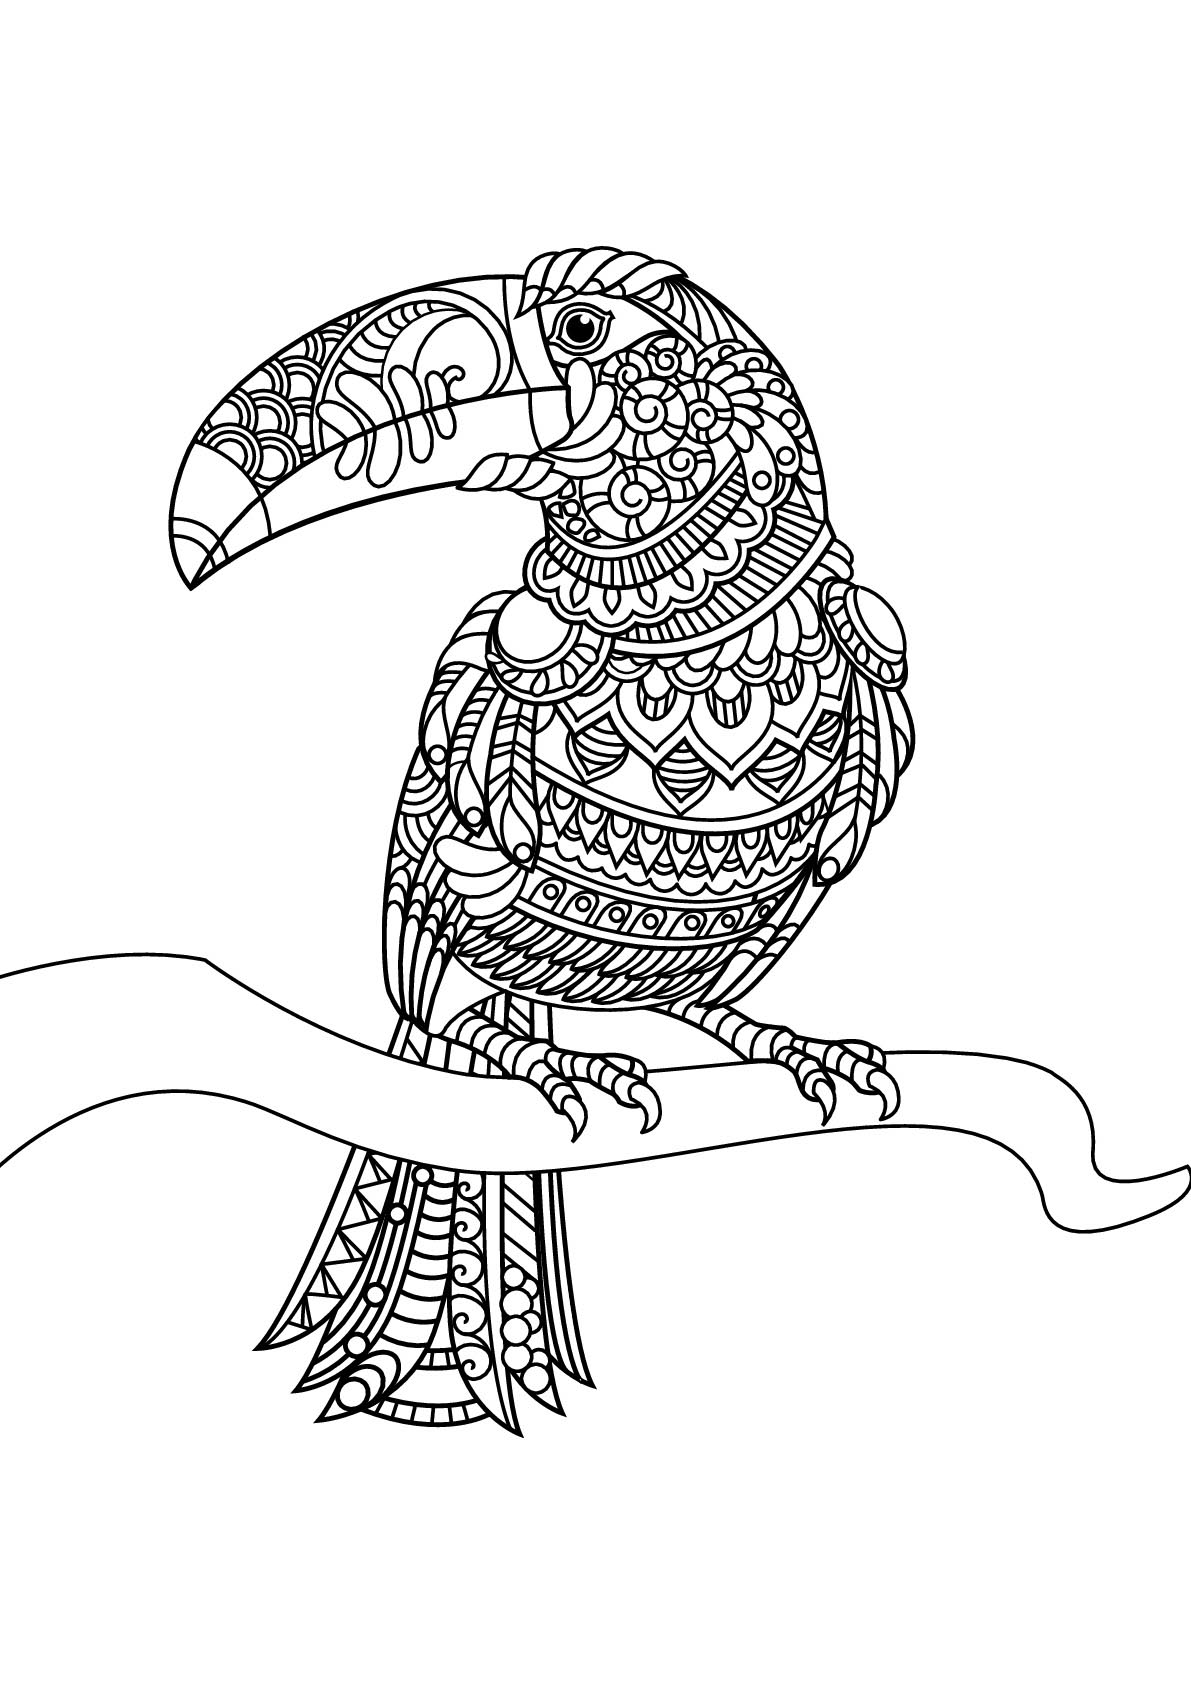 coloring book ~ Birdng Pages For Kids Cute Free To Print Printable Robin  Tremendous Bird Coloring Pages For Kids Image Ideas. Cute Bird Coloring  Pages For Kids Christmas. Cute Bird Coloring Pages